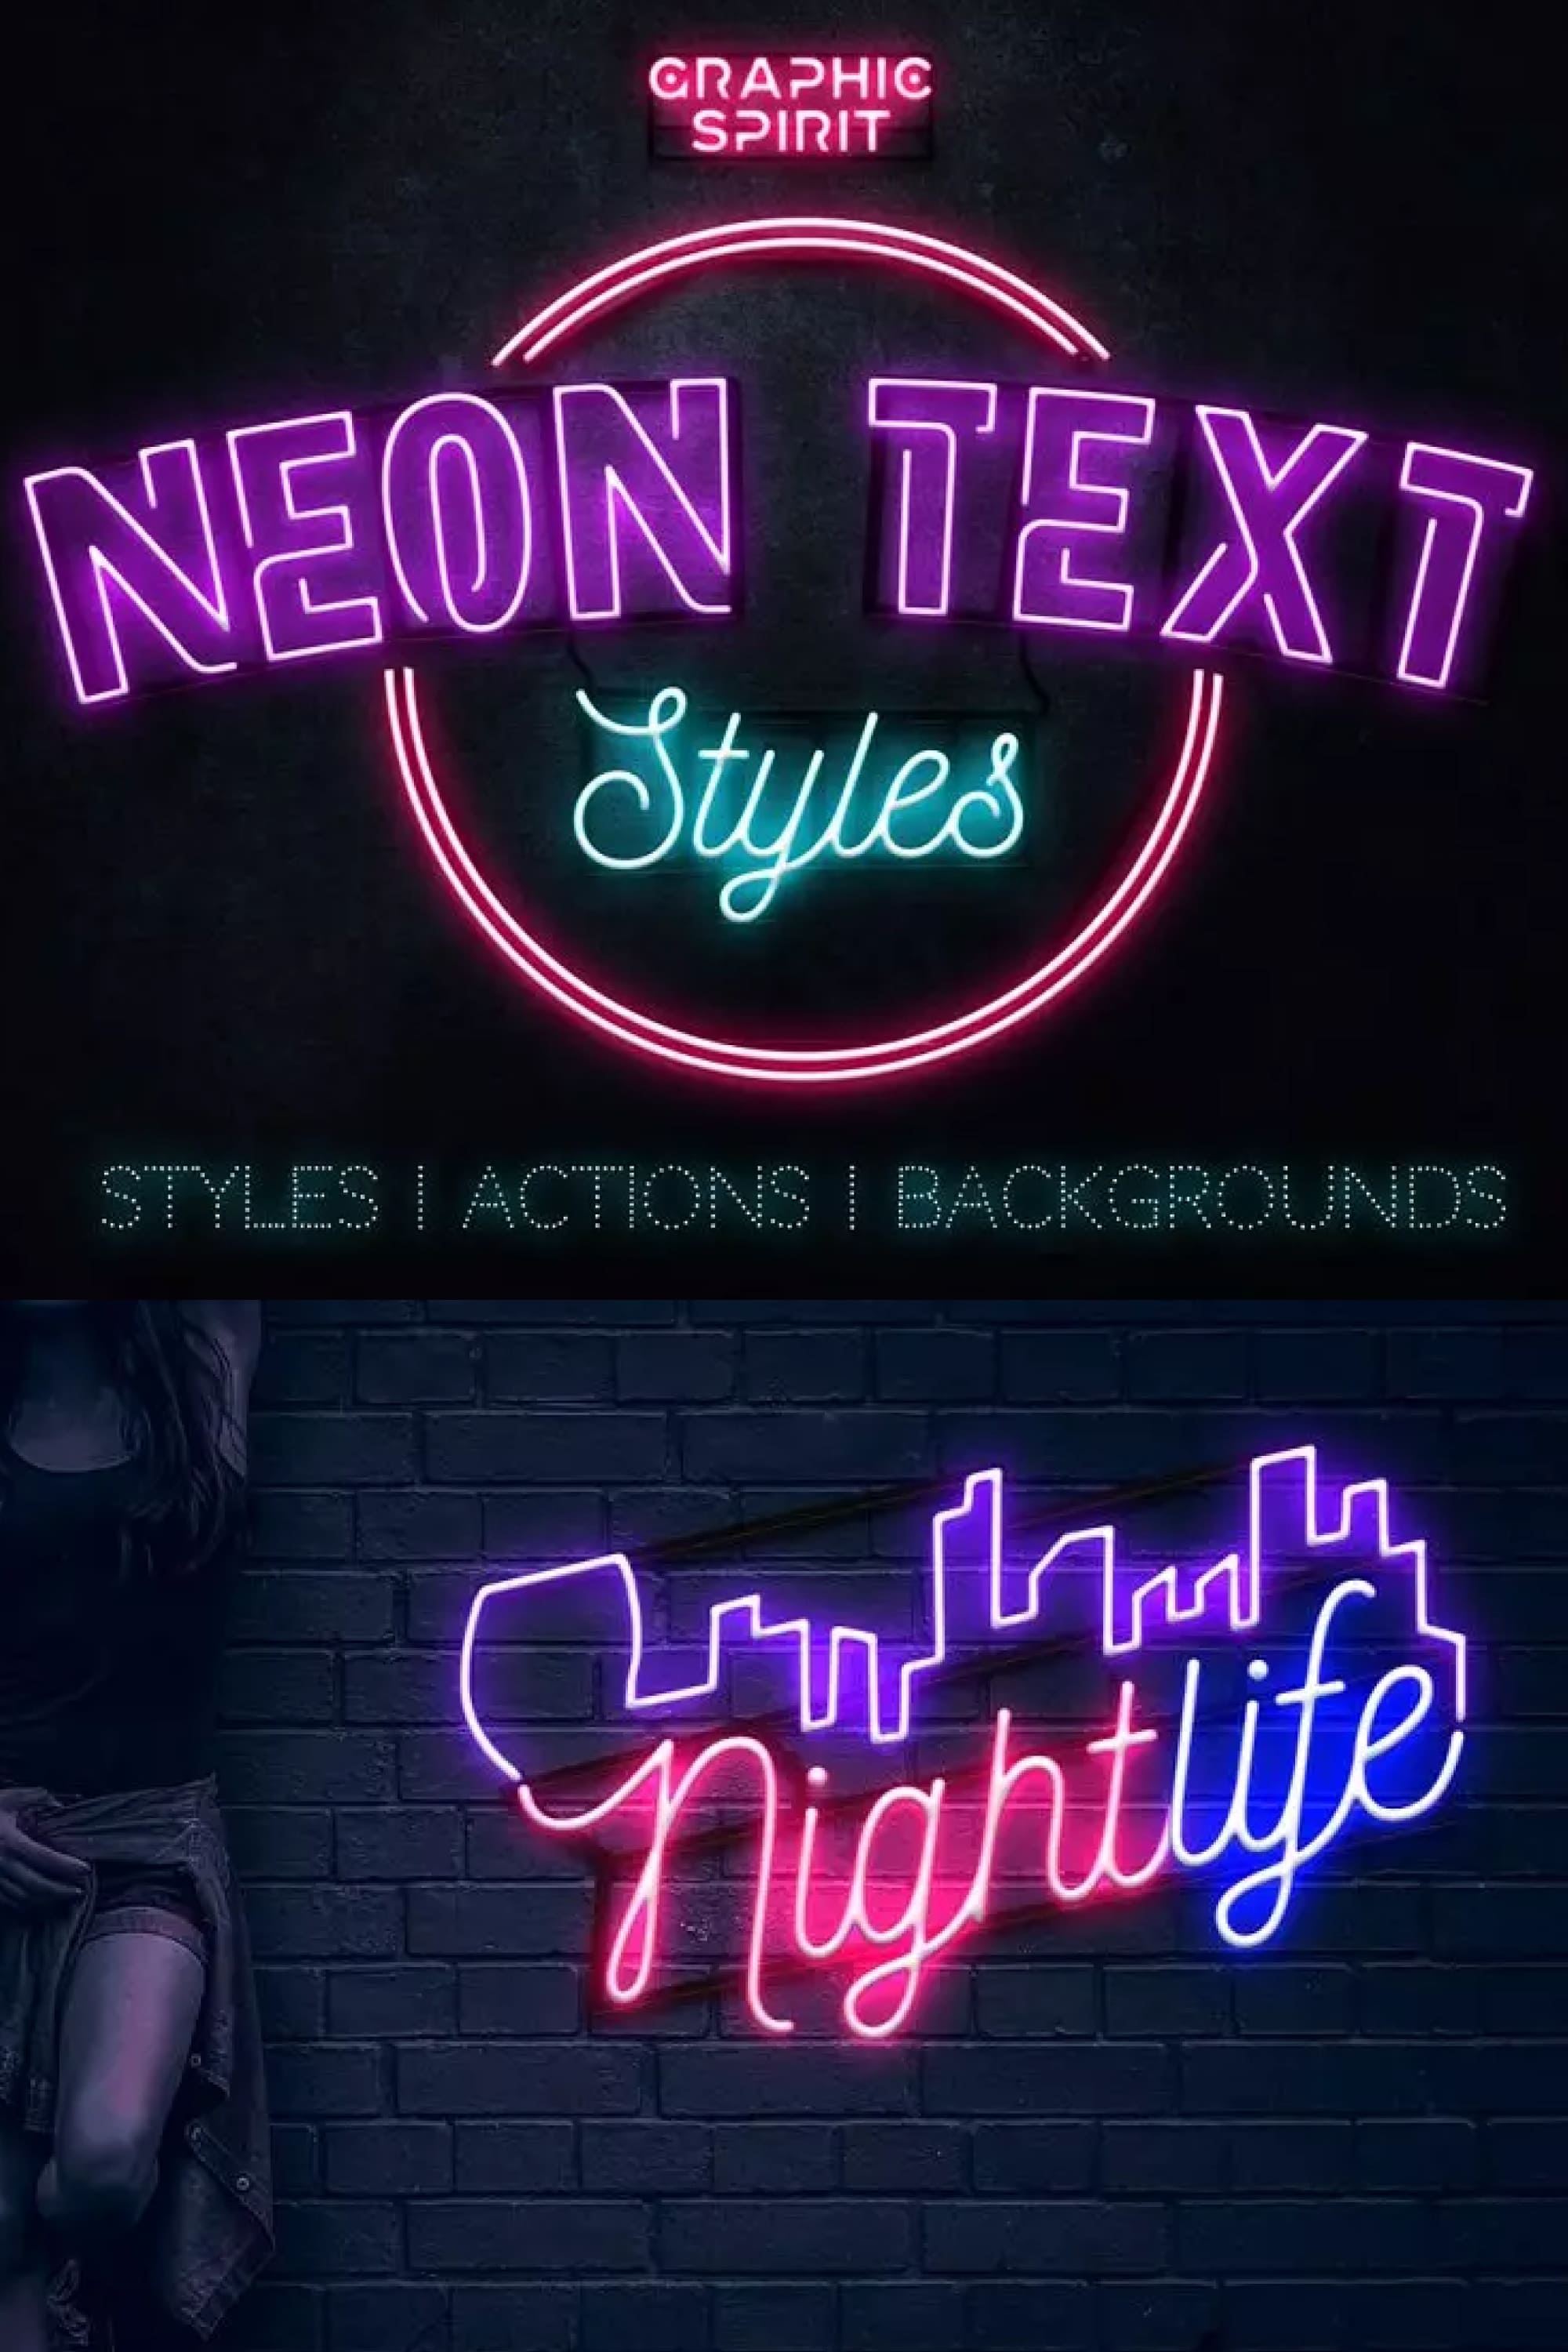 Neon text on a dark backgrounds.